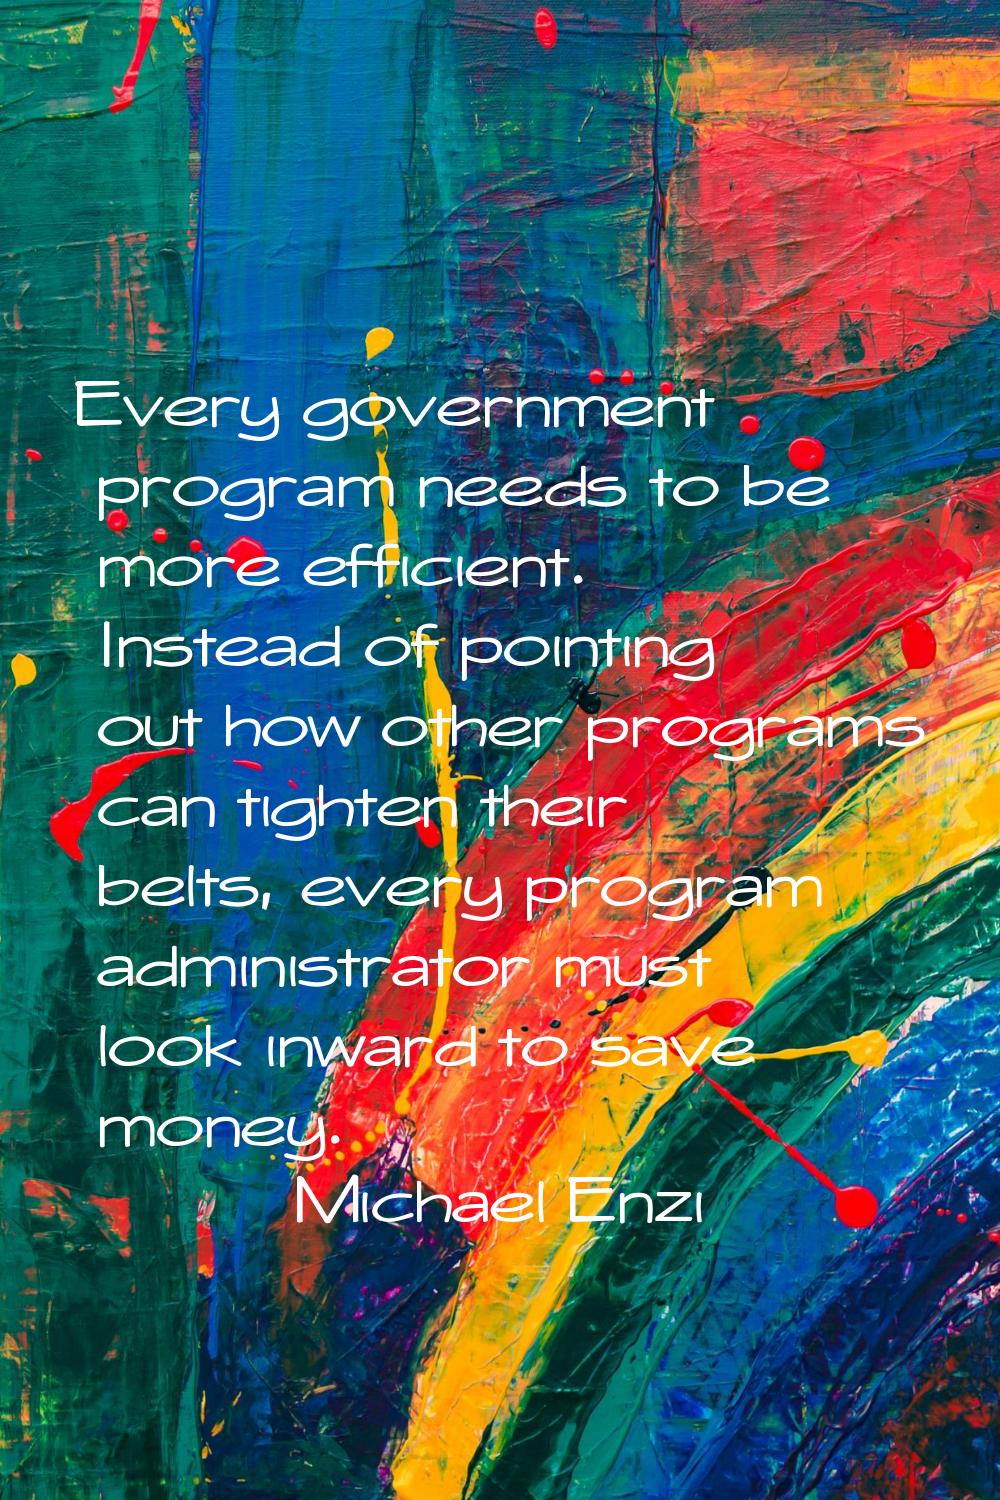 Every government program needs to be more efficient. Instead of pointing out how other programs can